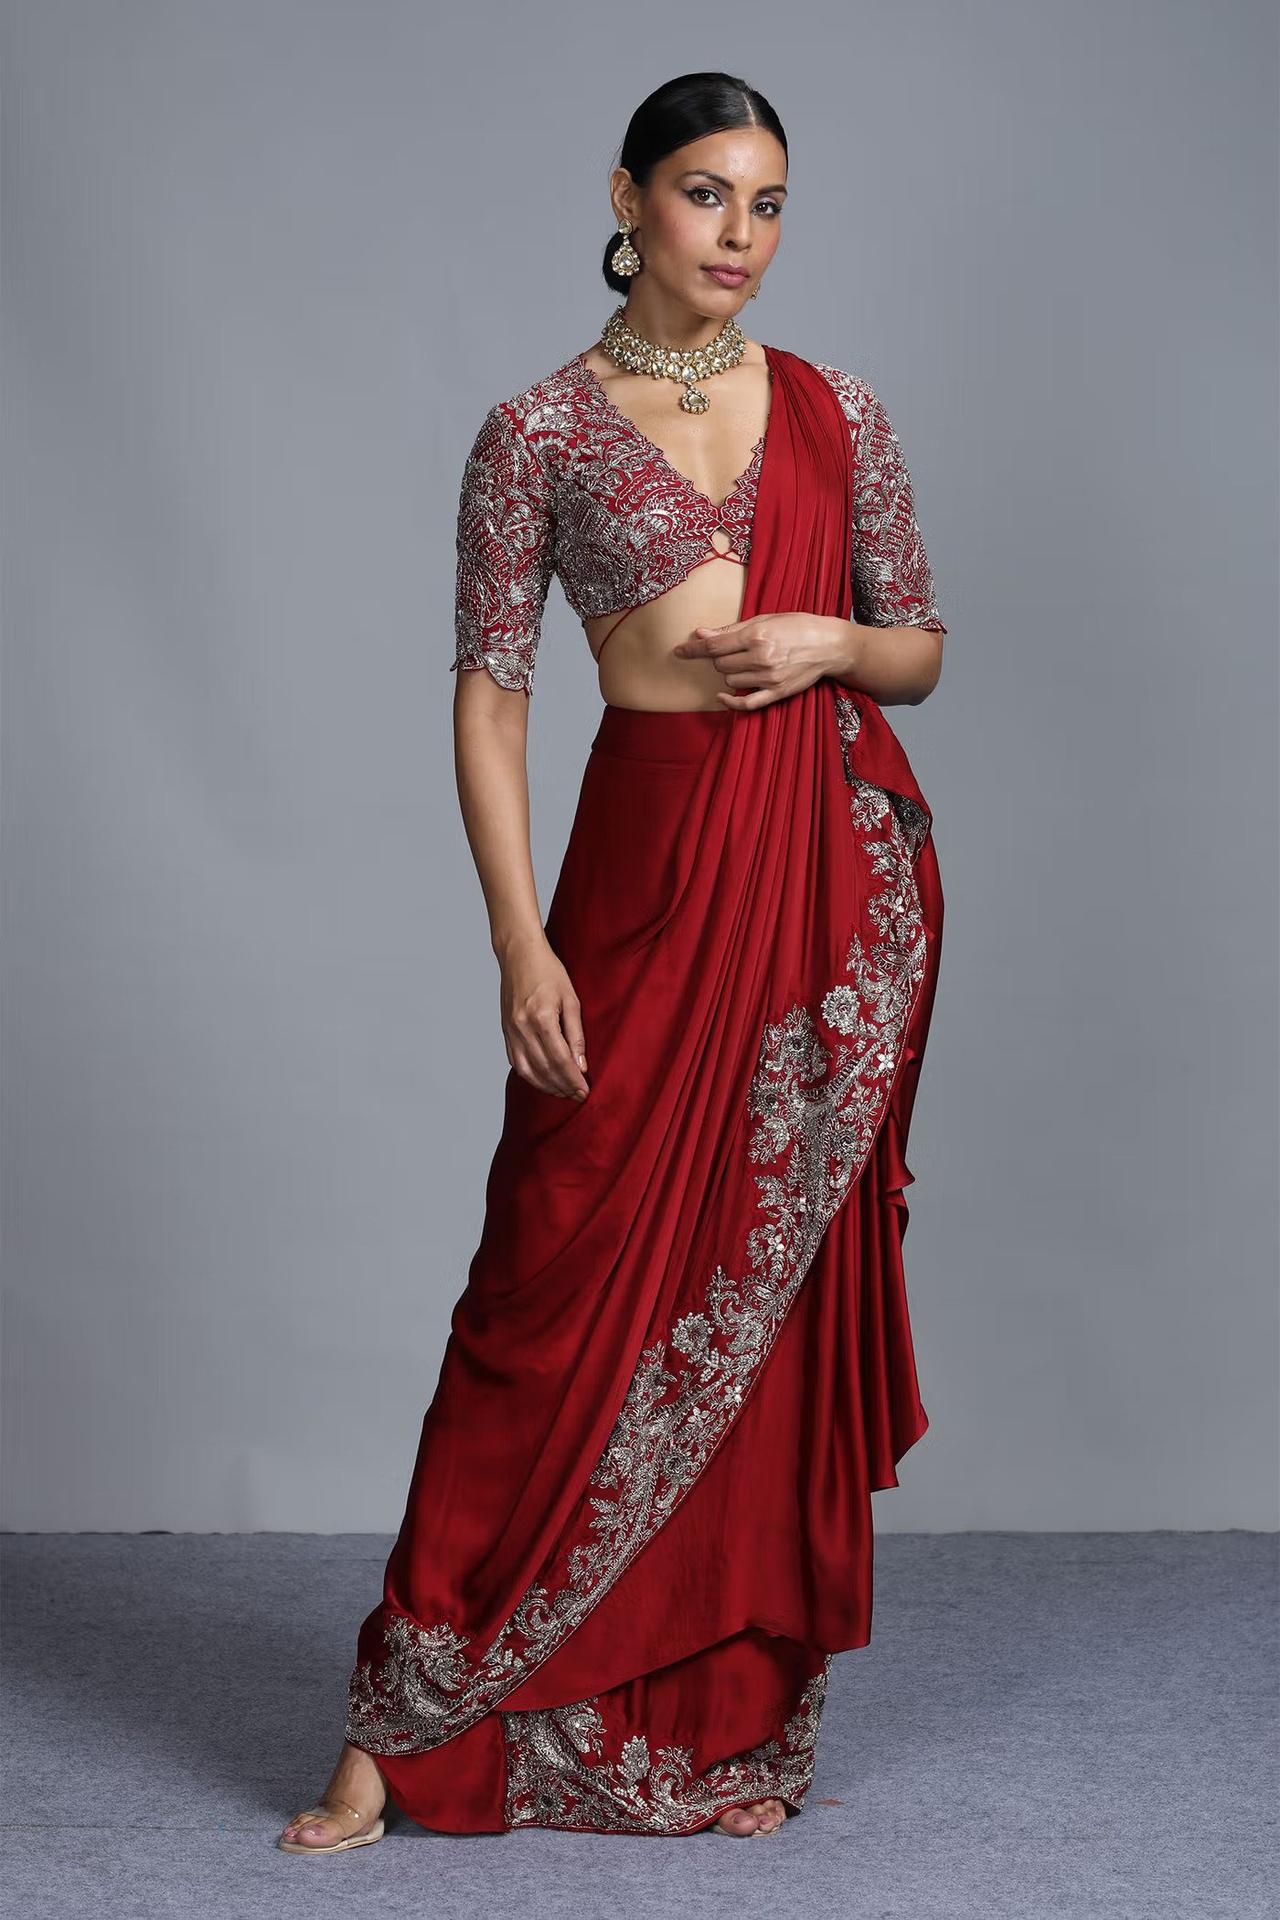 12 Best and Different Saree Draping Styles To Try For Weddings And Parties   Saree draping styles, South indian bride saree, Different saree draping  styles